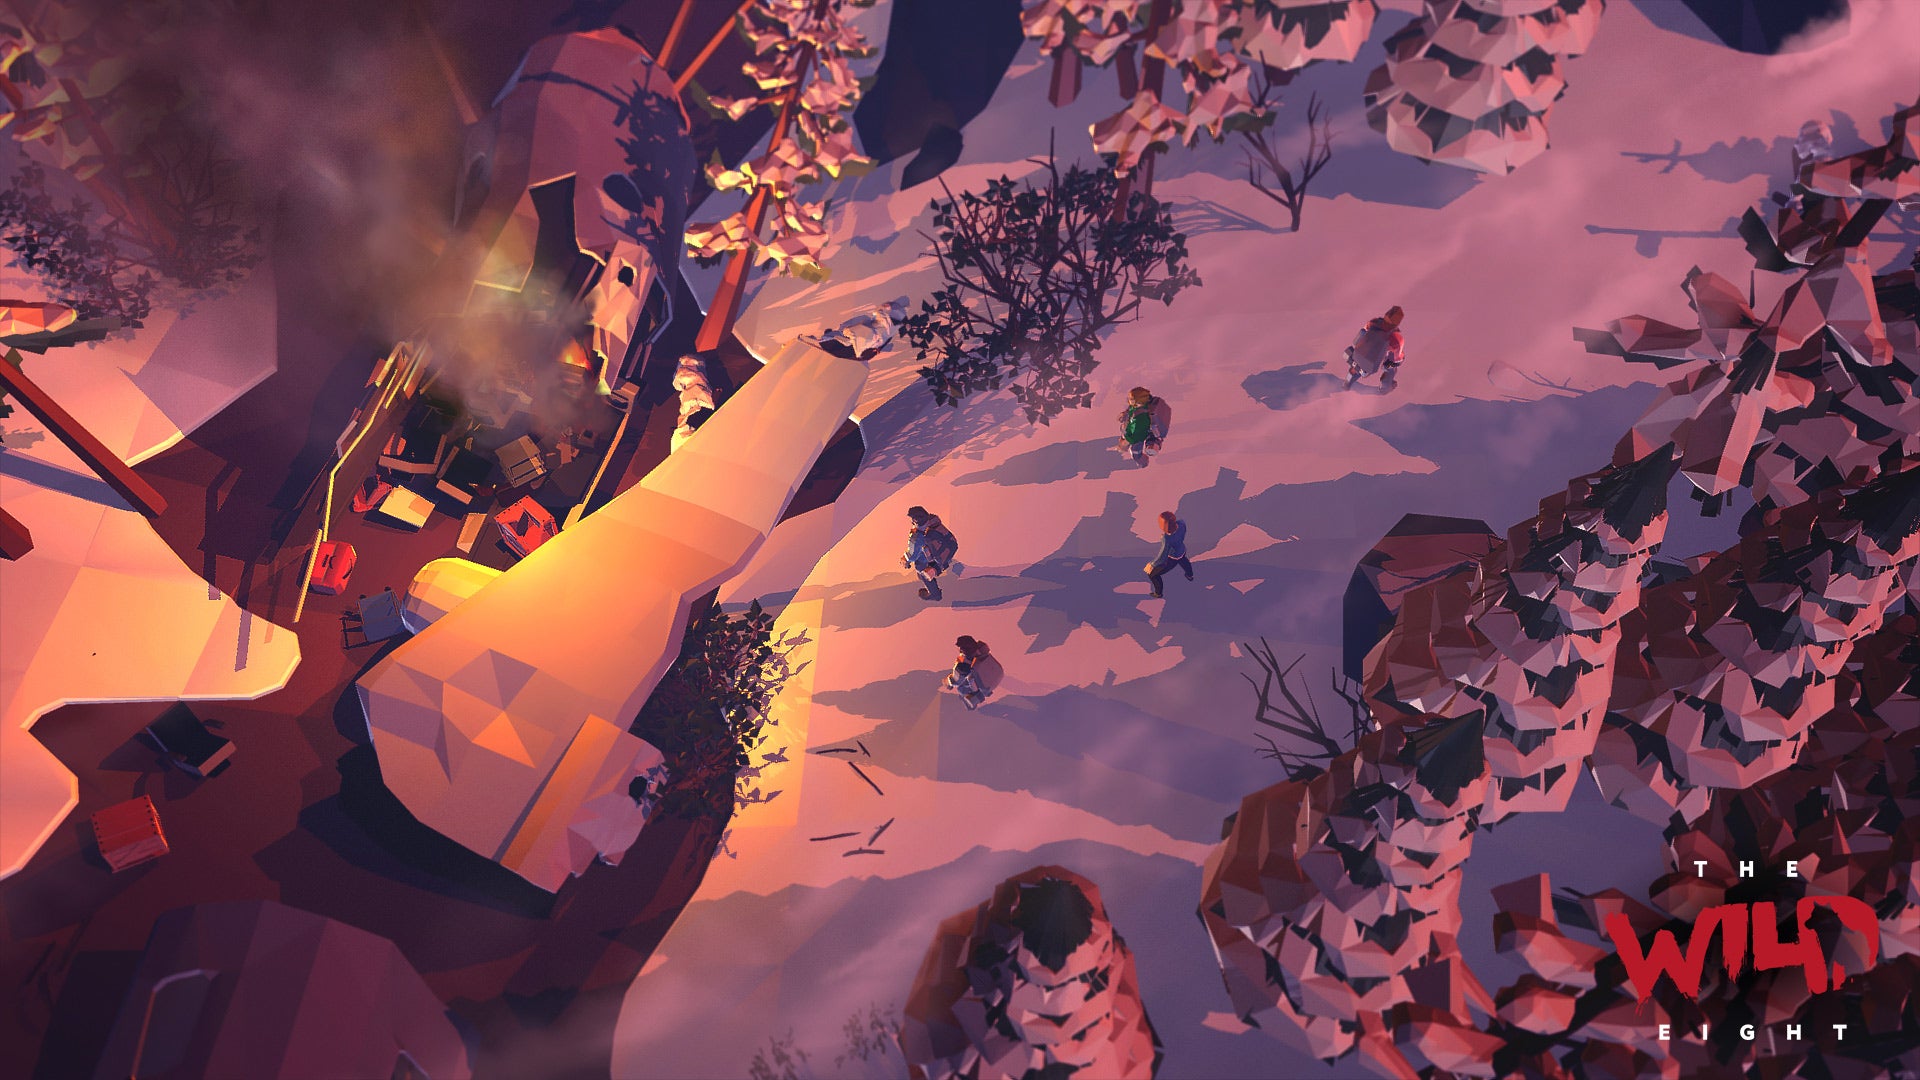 Image for Co-op survival game The Wild Eight gets playable demo